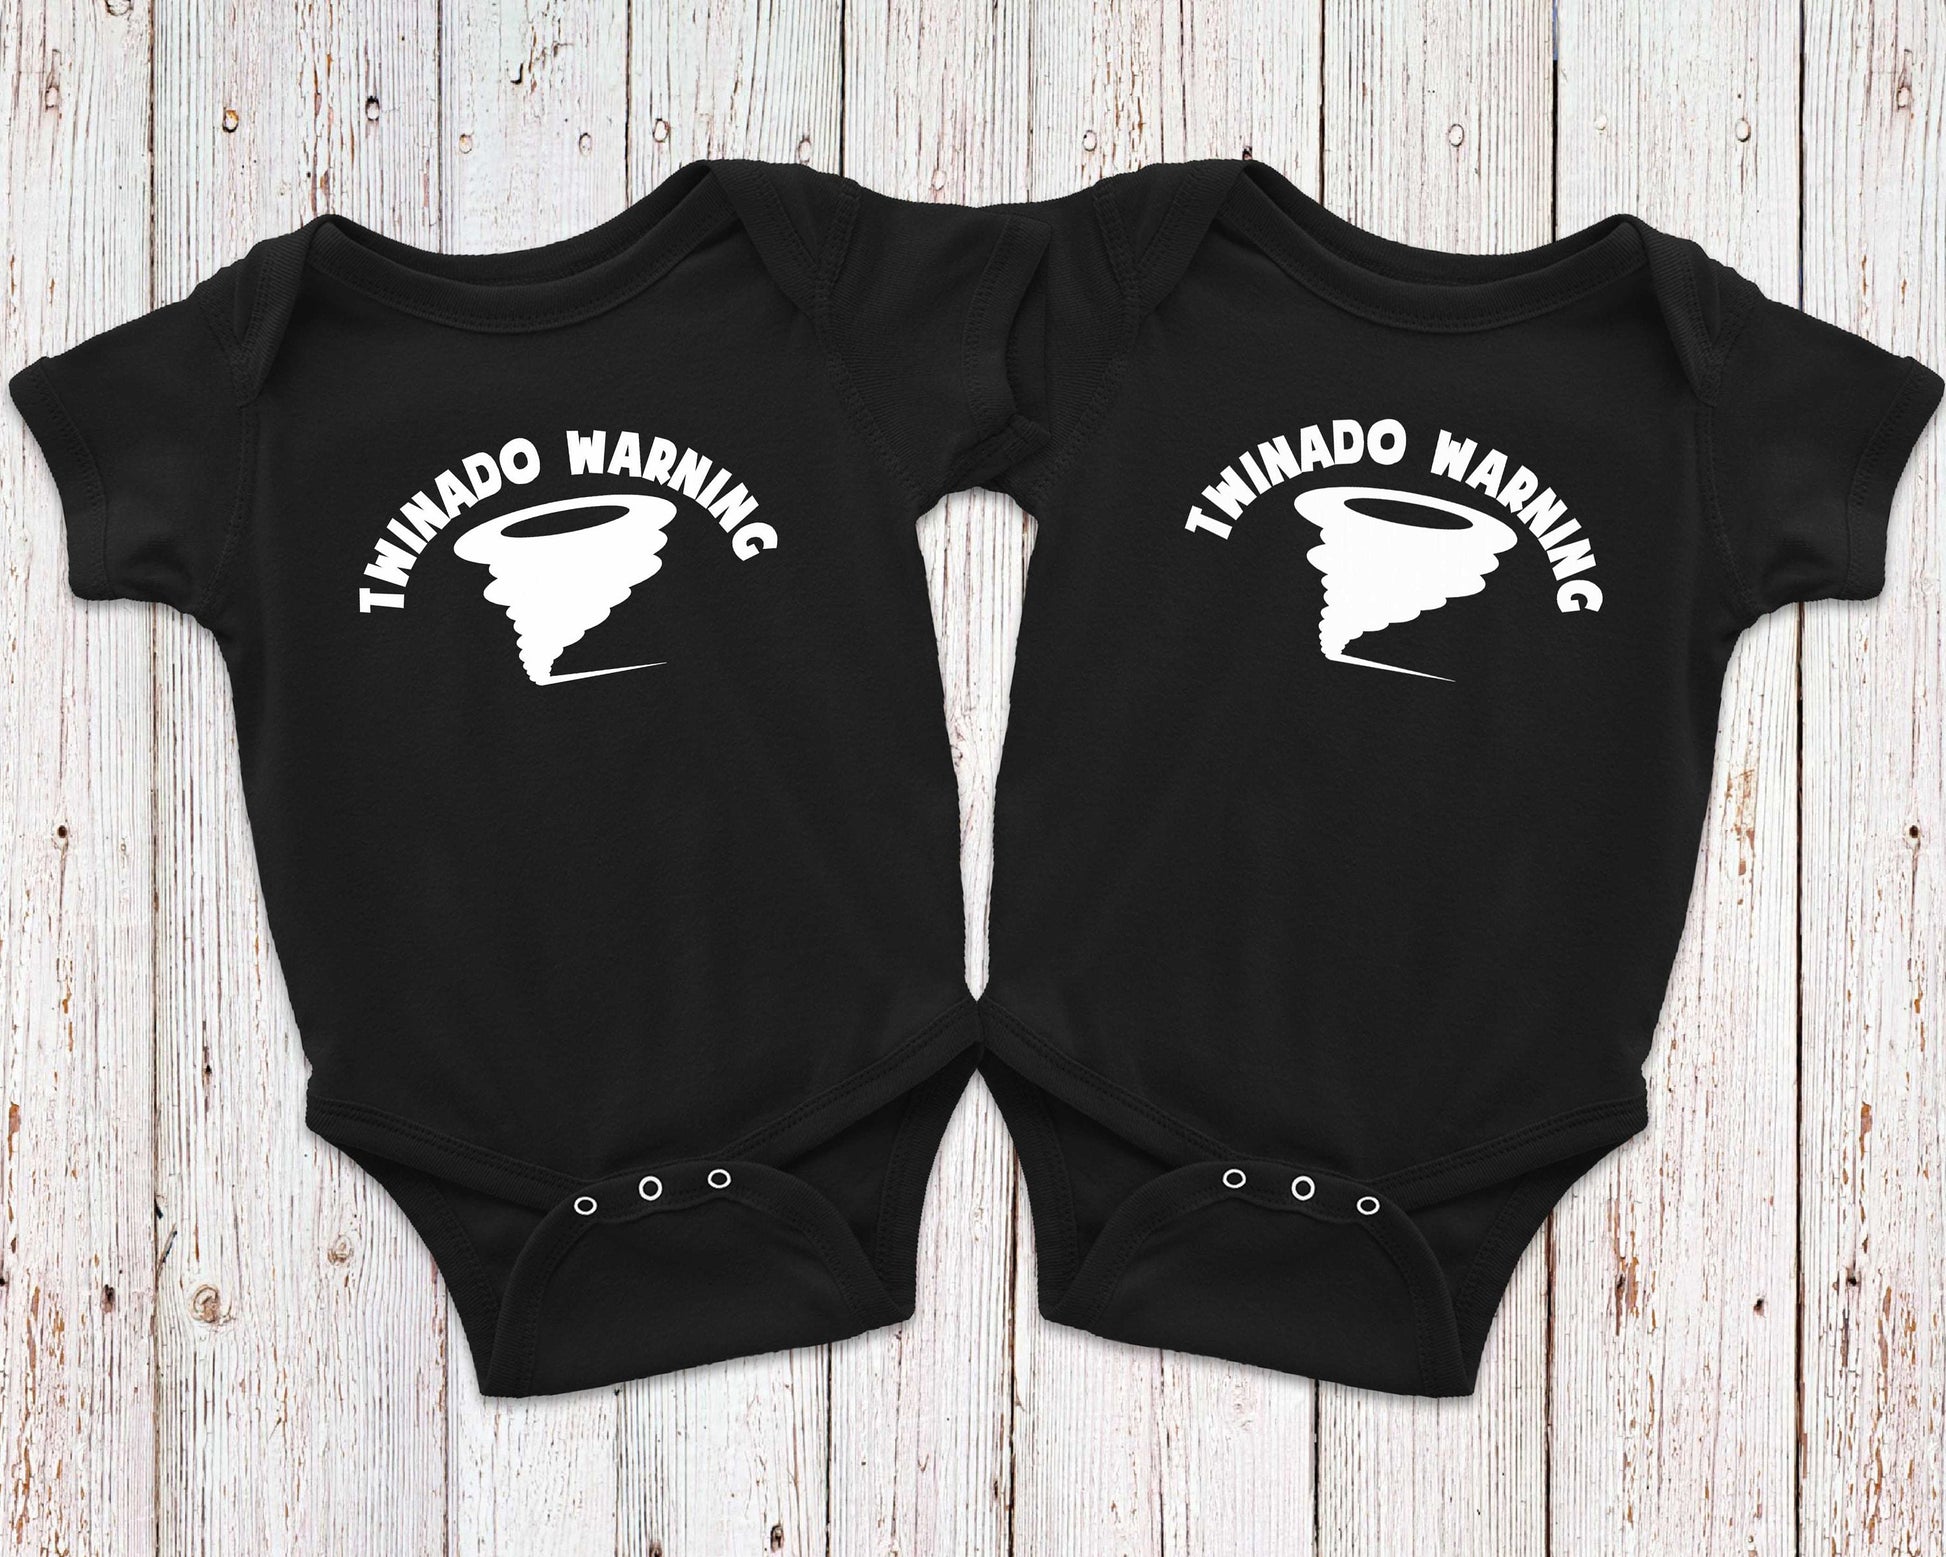 Twinado Warning T-Shirts or Bodysuits for Twins - Identical Twins - Twin Tees - Fraternal Twins - Shirts for Twins - Twin Toddler Shirts